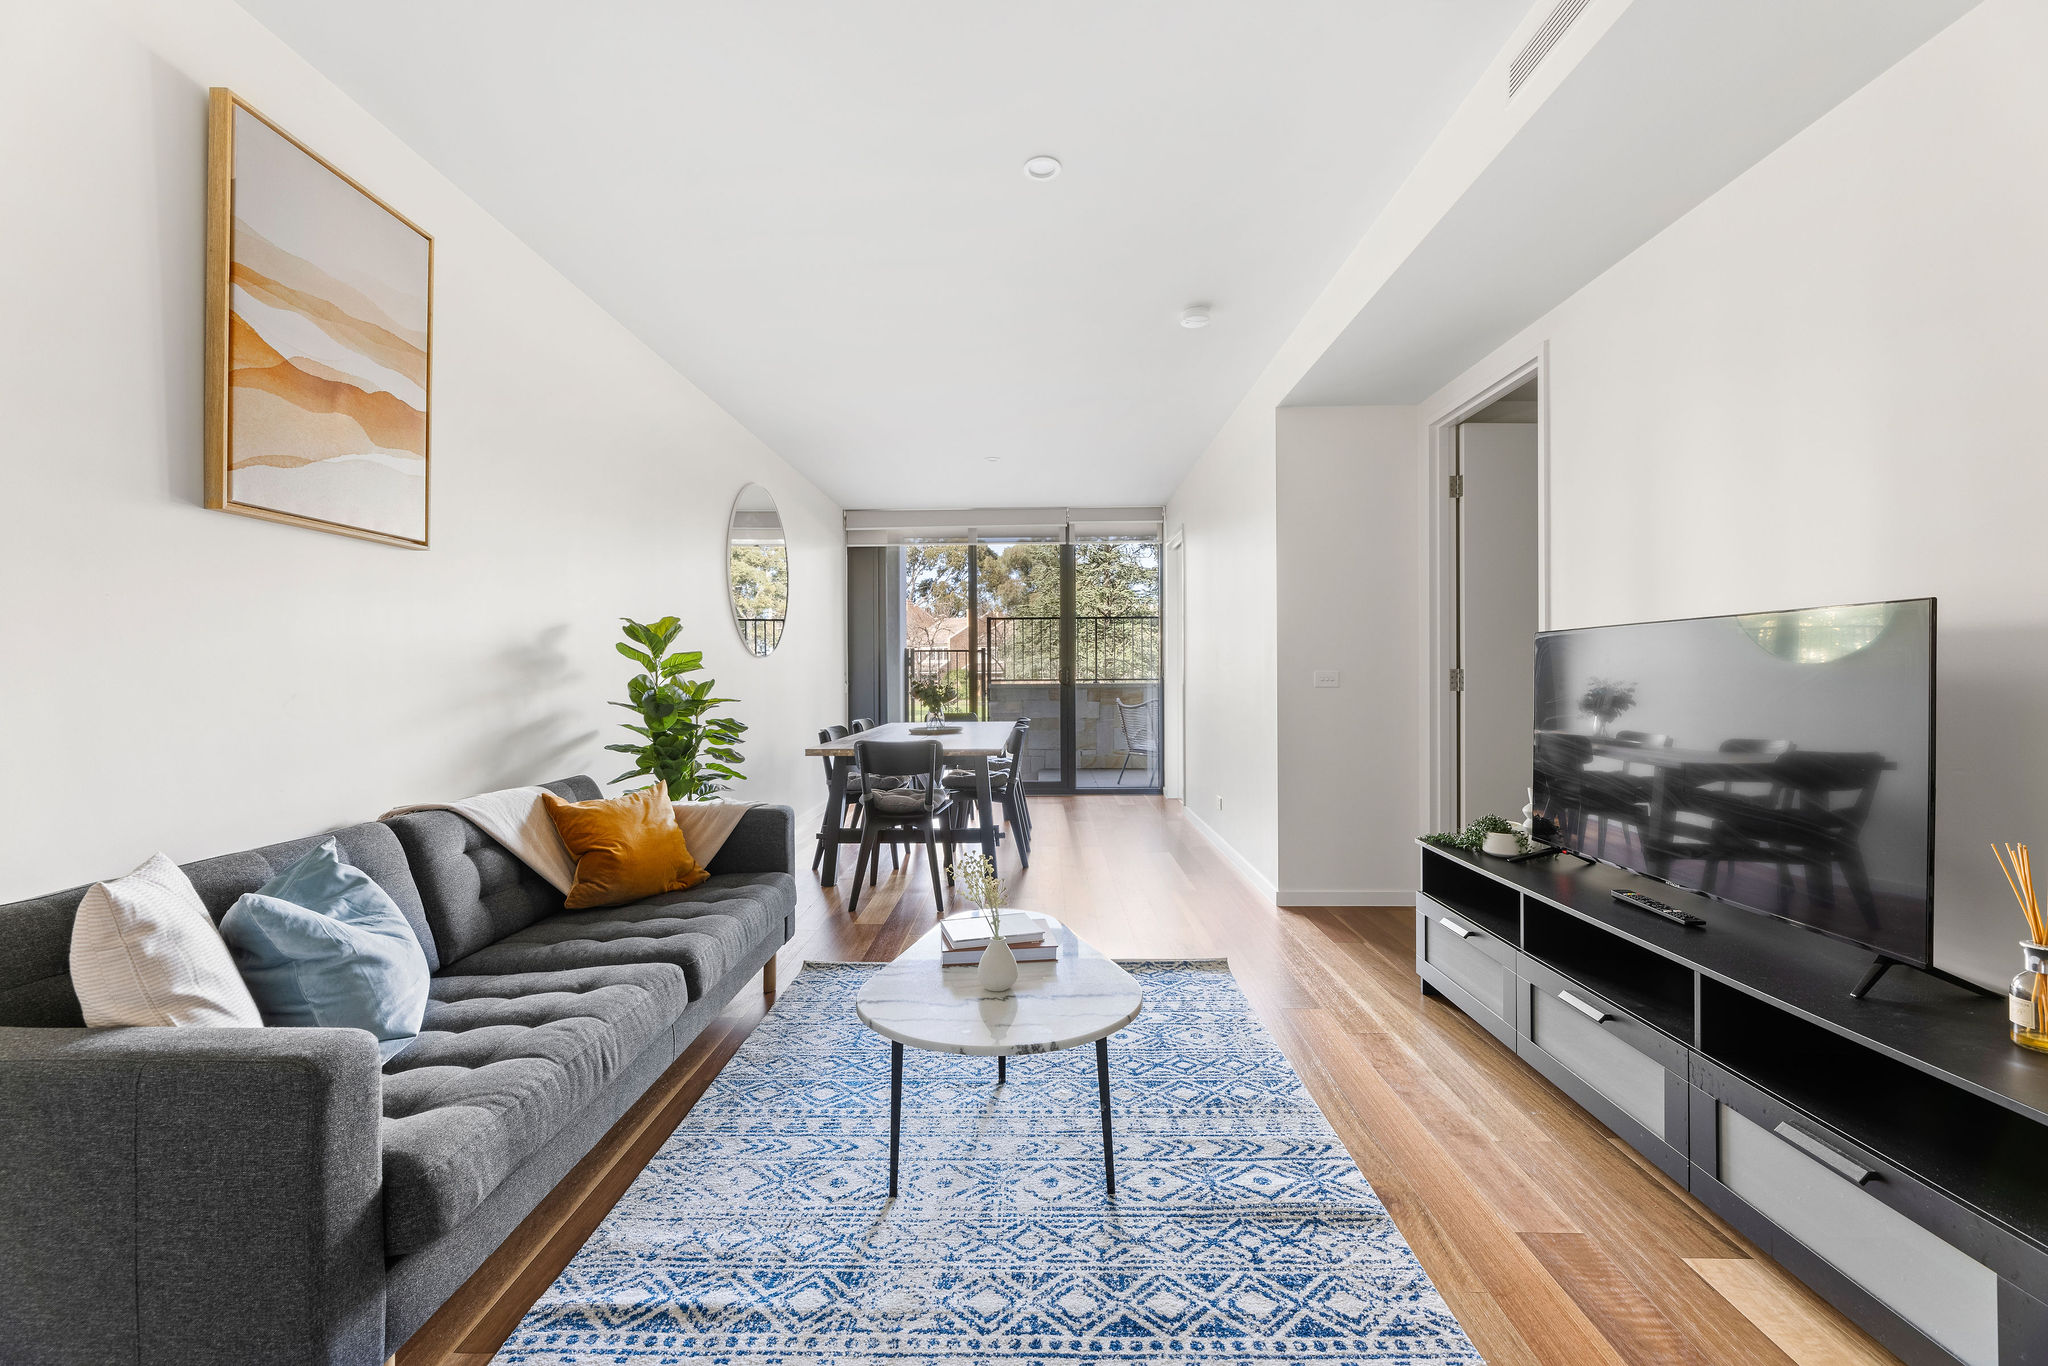 Living Room - Two Bedroom Apartment - Founders Lane Apartments - Canberra - Urban Rest